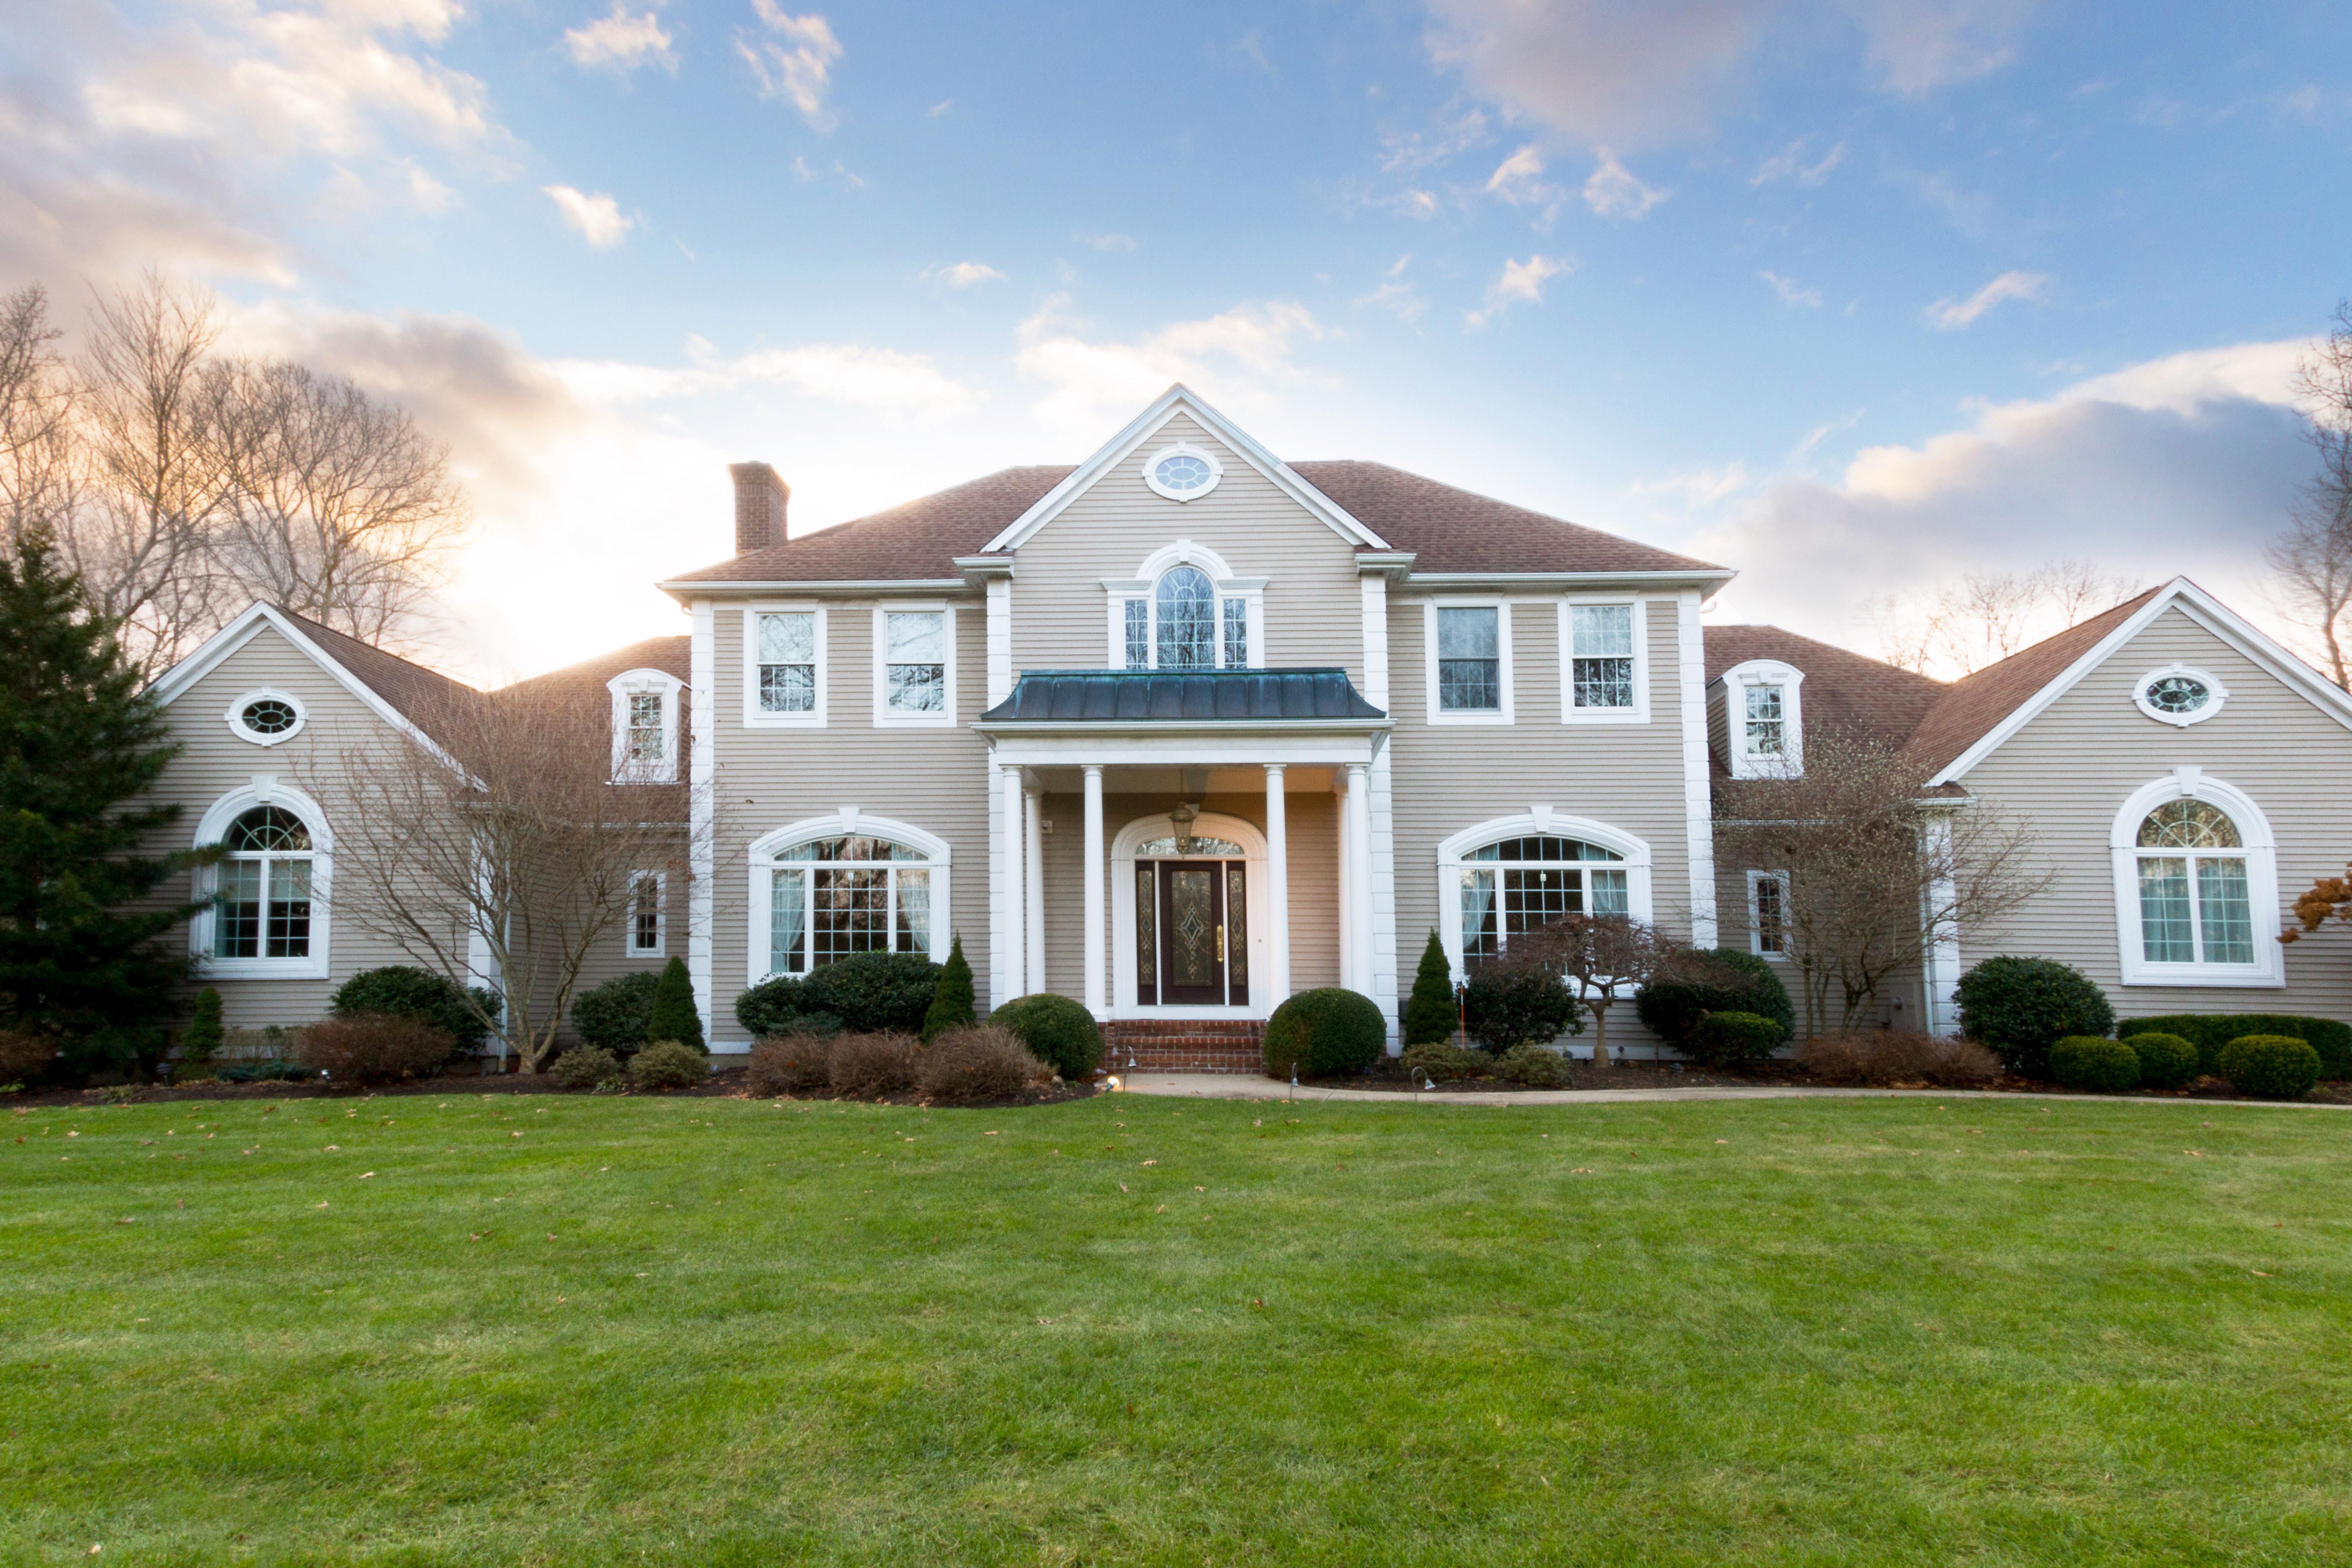 QUAIL HOLLOW COLONIAL SELLS FOR $1.335M, MARKING THE HIGHEST  NON-WATER AMENITY SALE IN NORTH KINGSTOWN THIS YEAR*